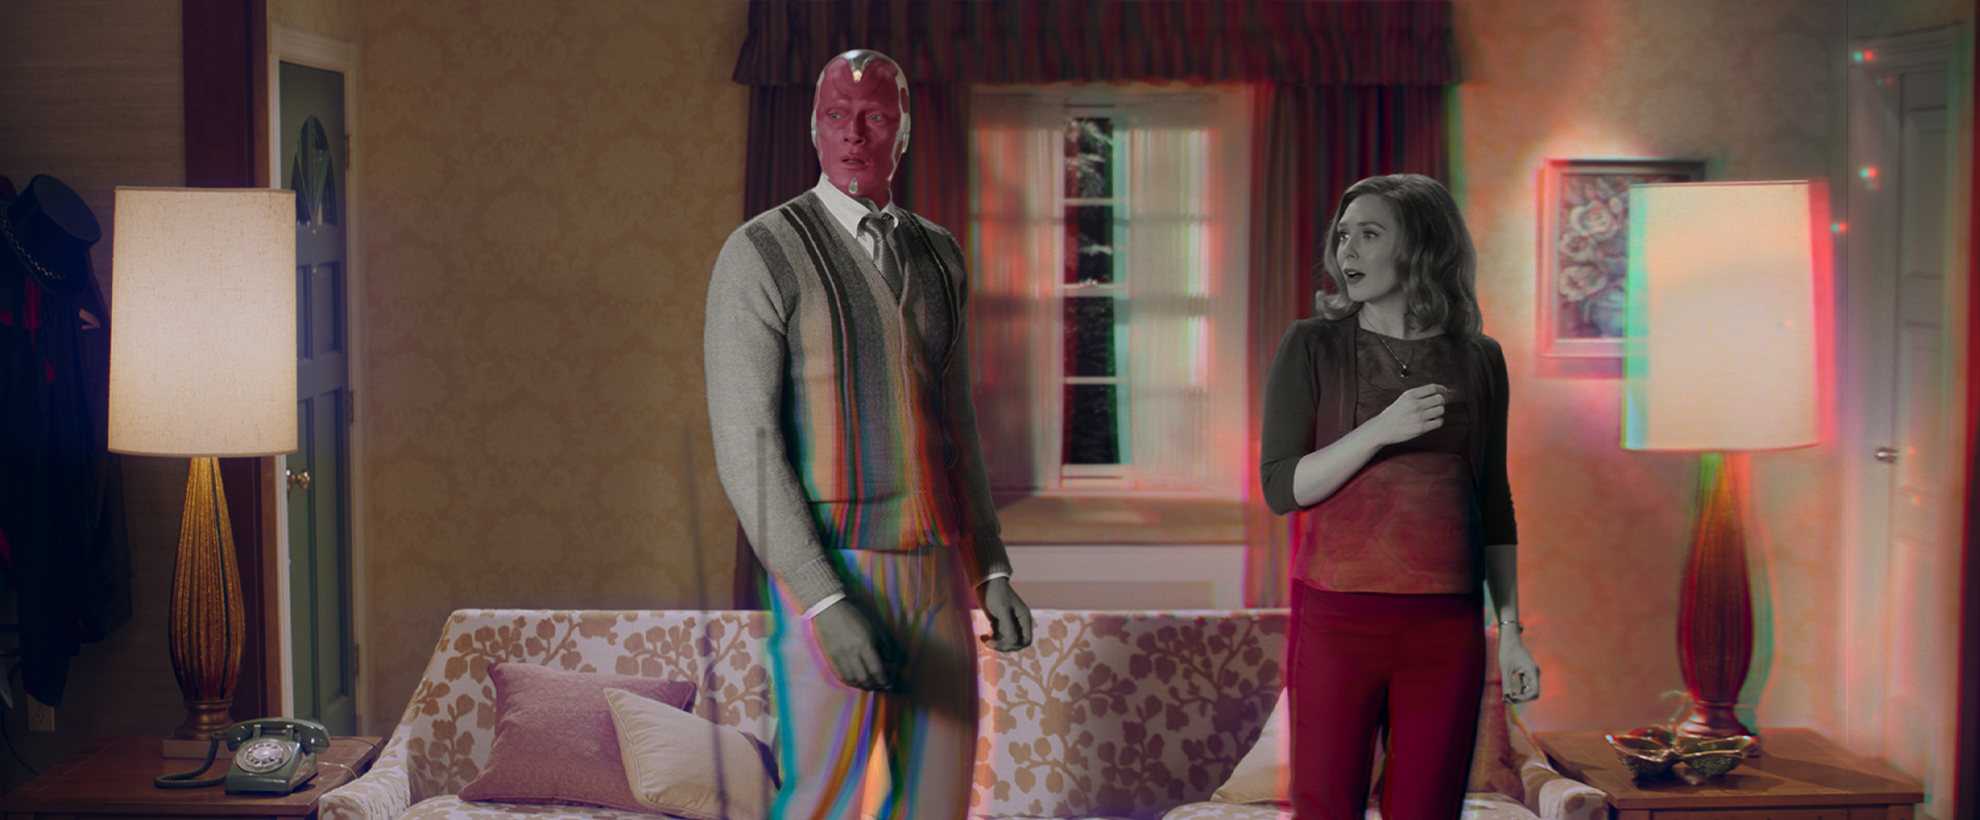 Wanda and Vision in their living room as it shifts from black and white to colour